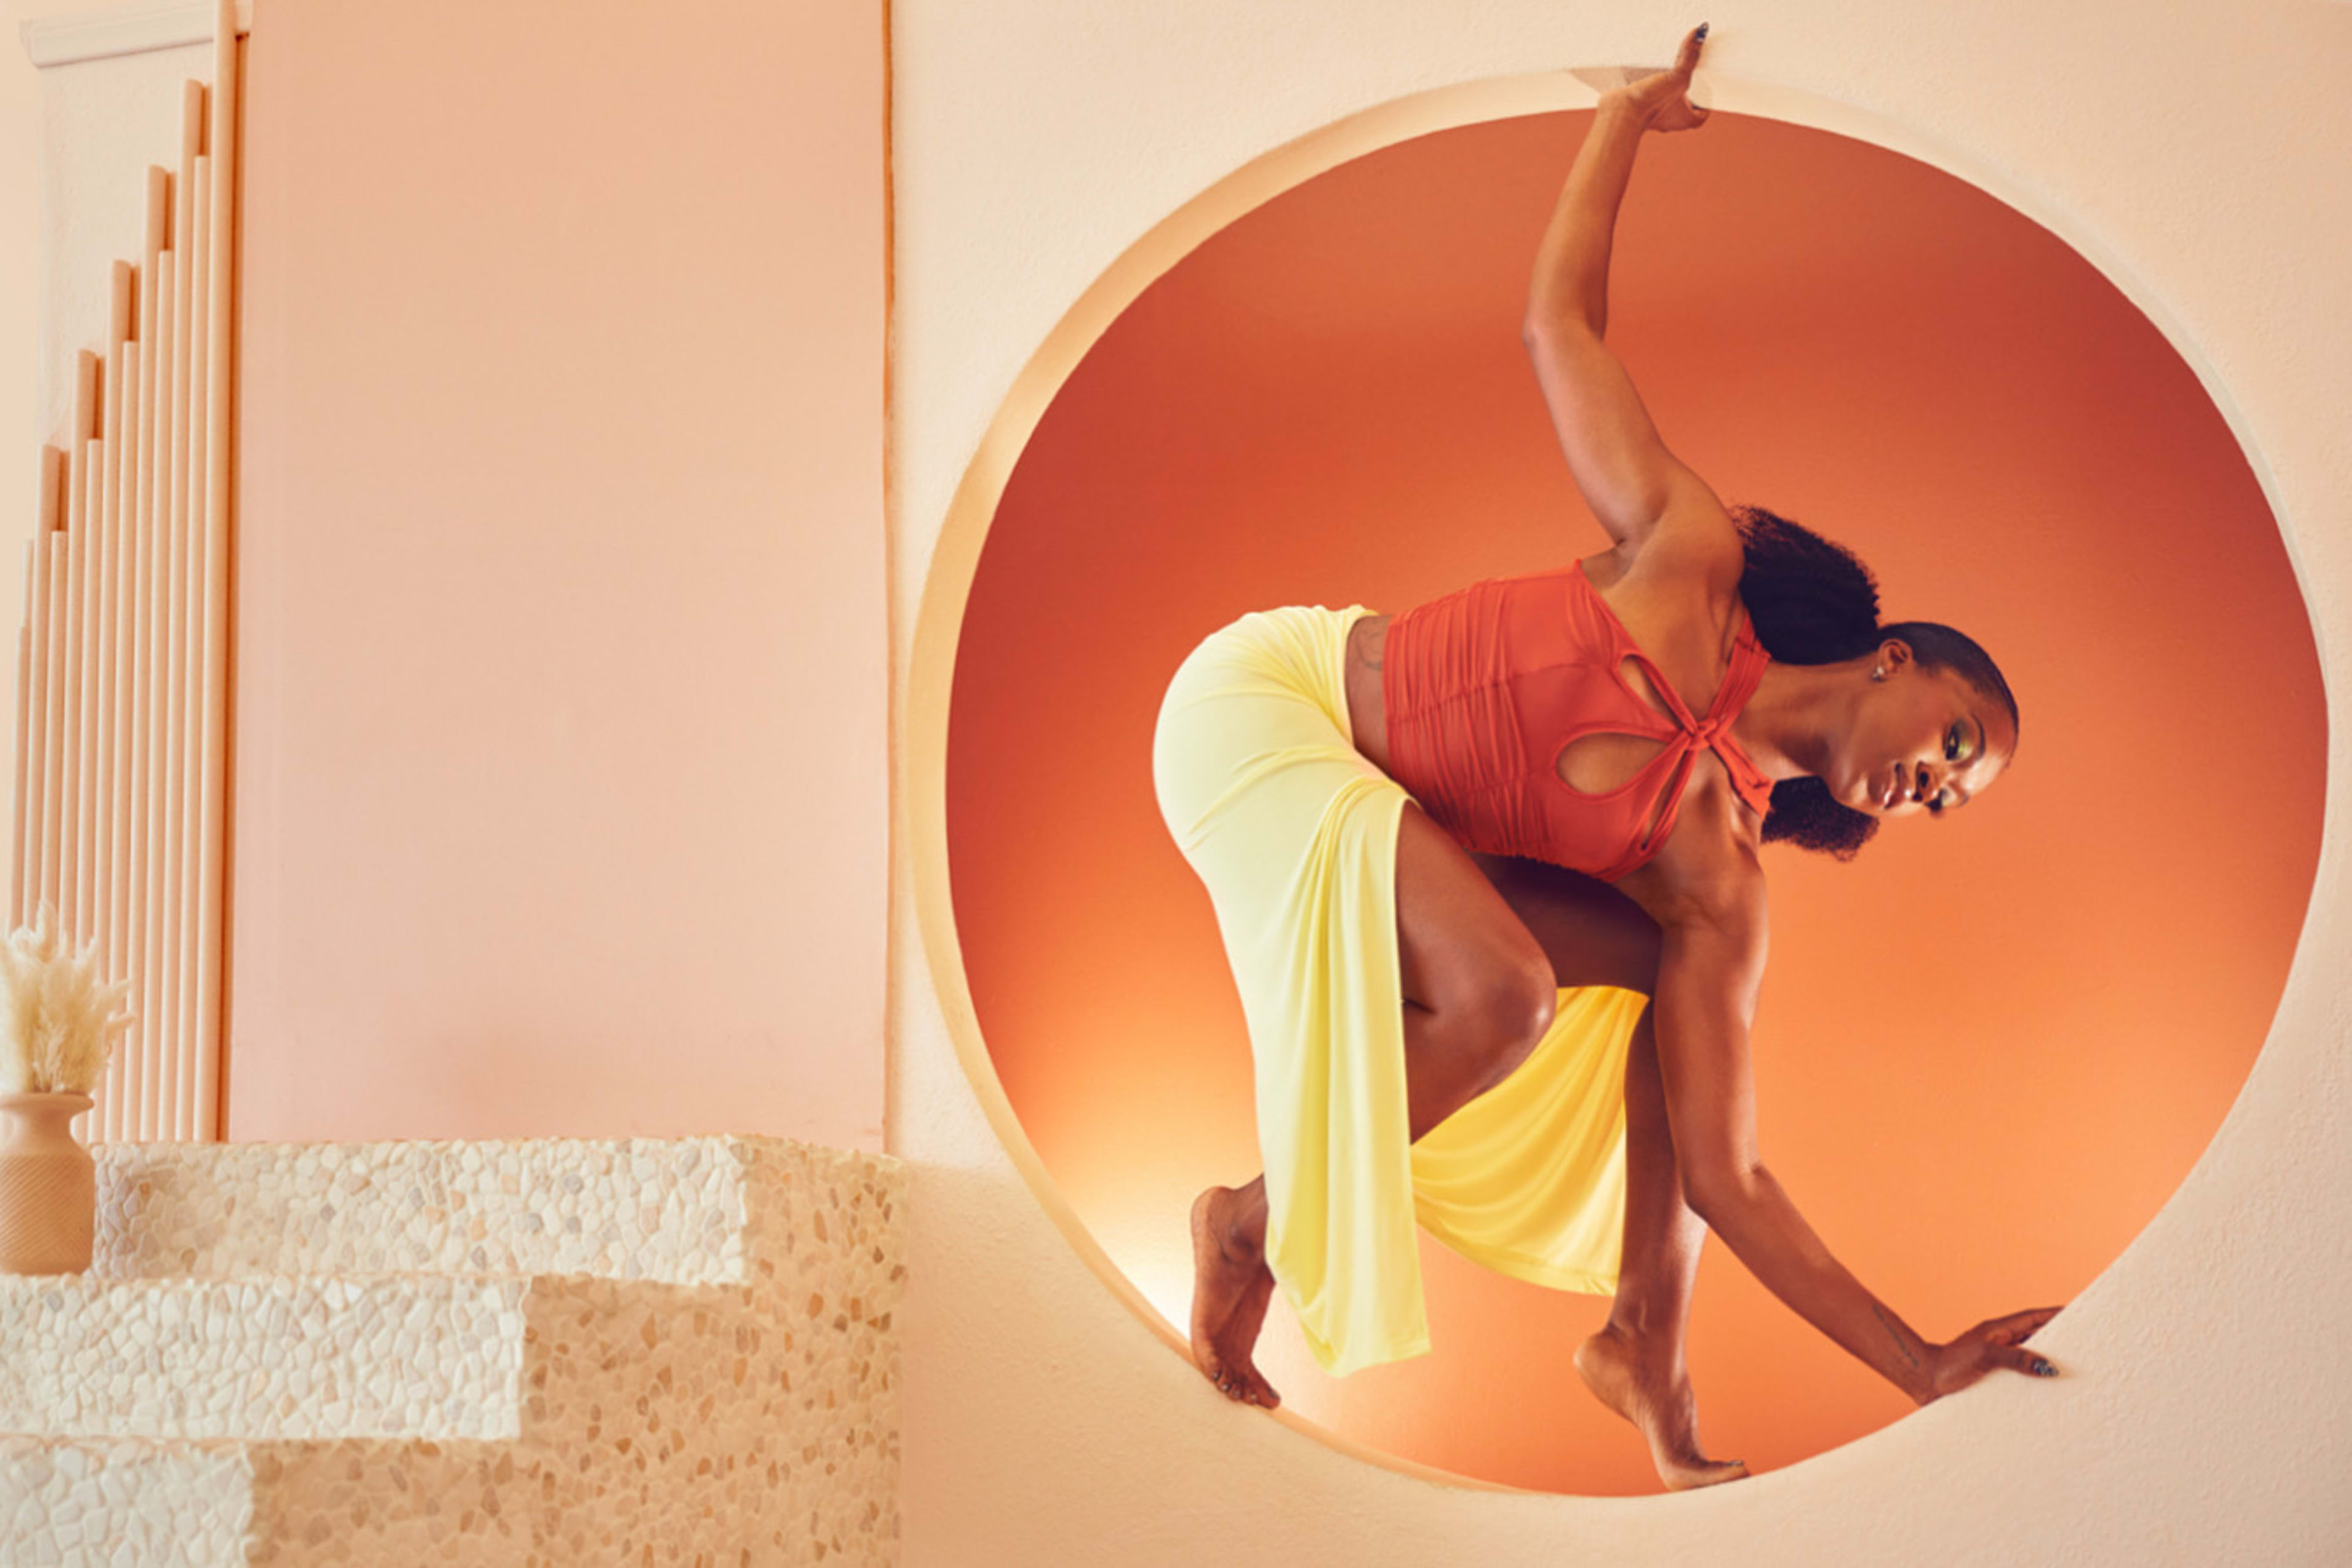 A woman is posing in a circular window during an orange and beige photo shoot.